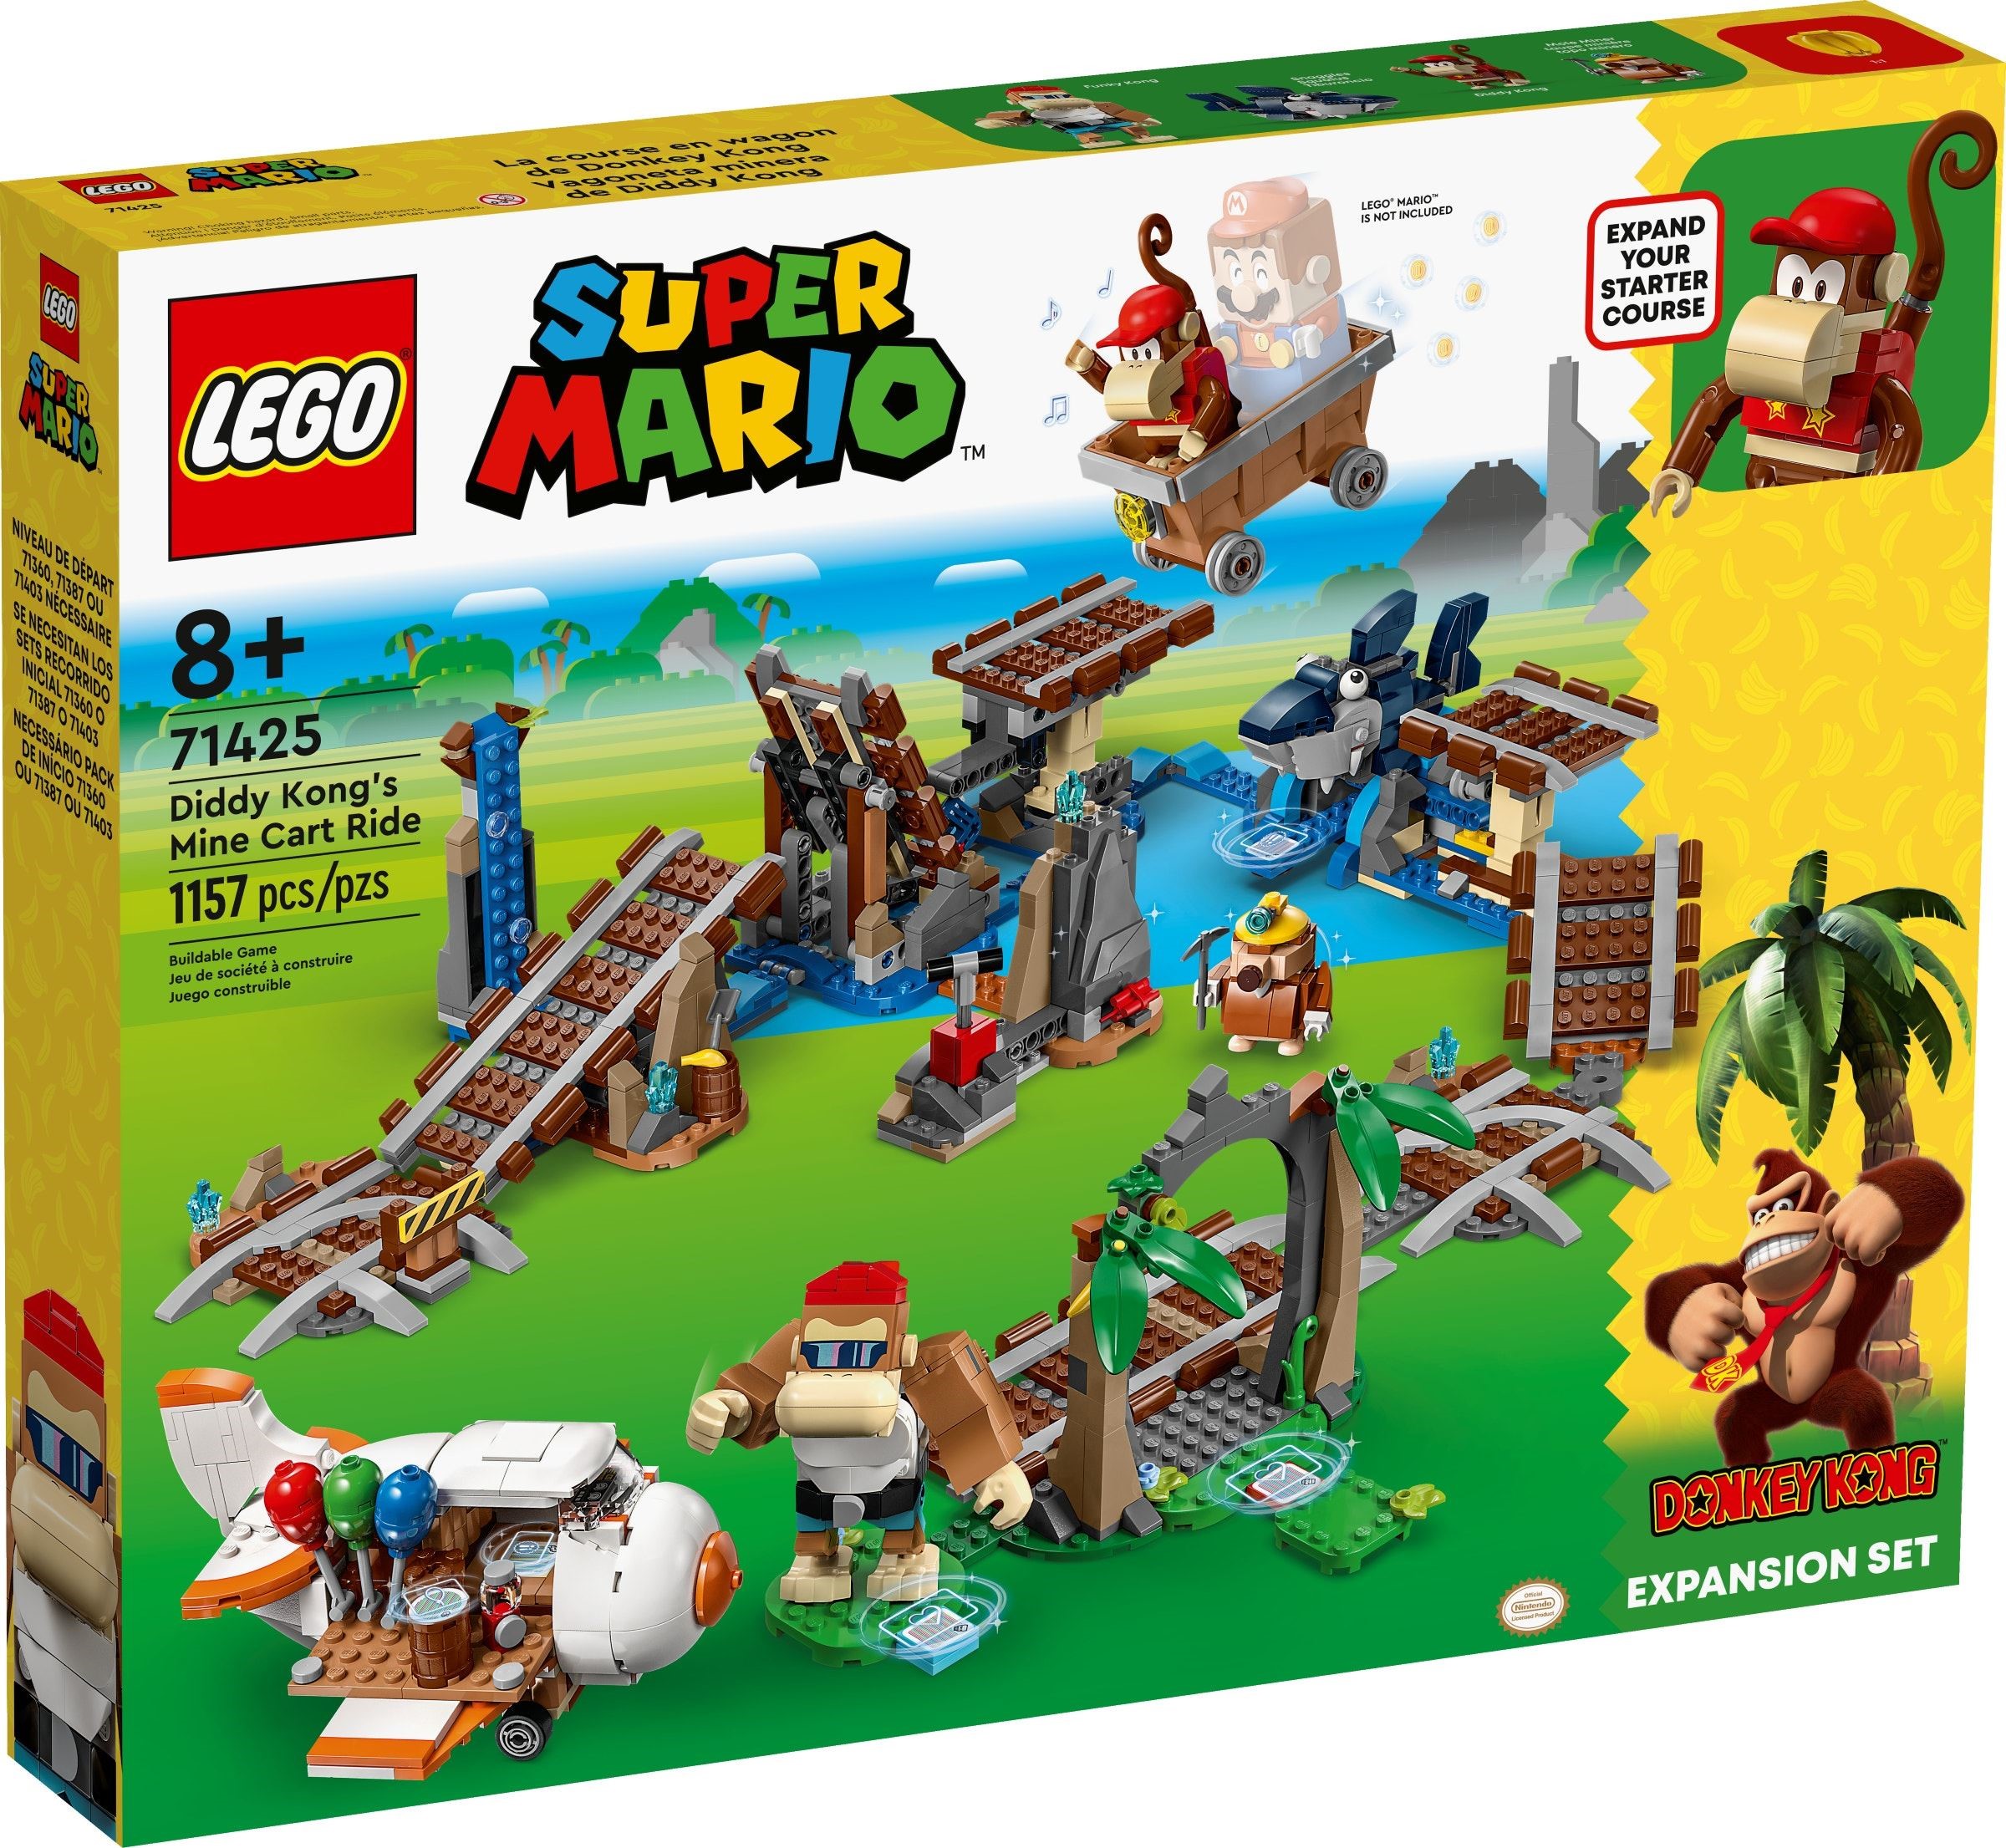 LEGO Super Mario Donkey Kong Sets Officially Announced - The Brick Fan